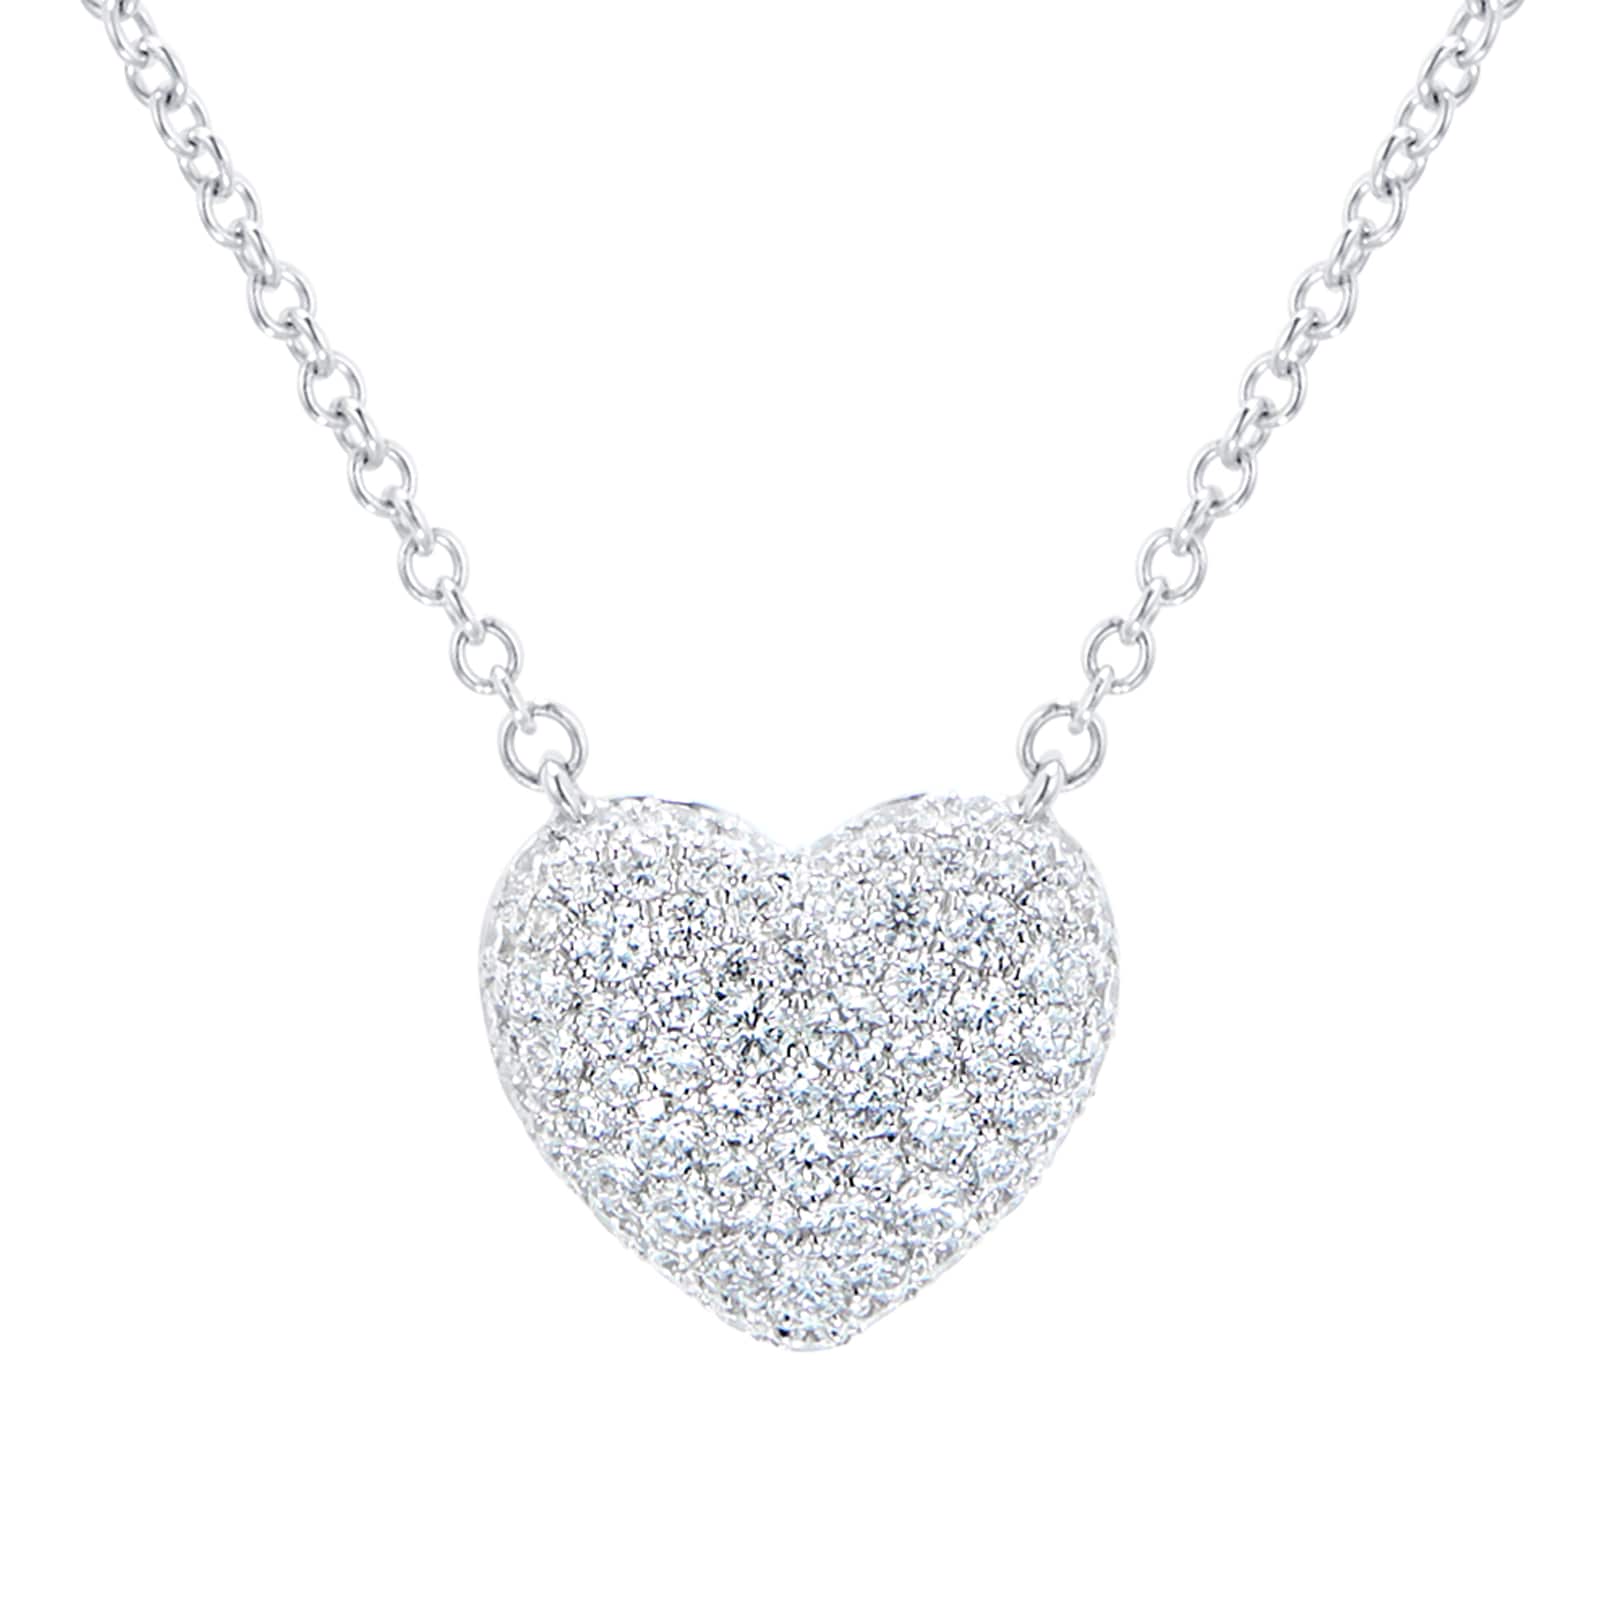 The Classic Lady Heart necklace in 18k white gold